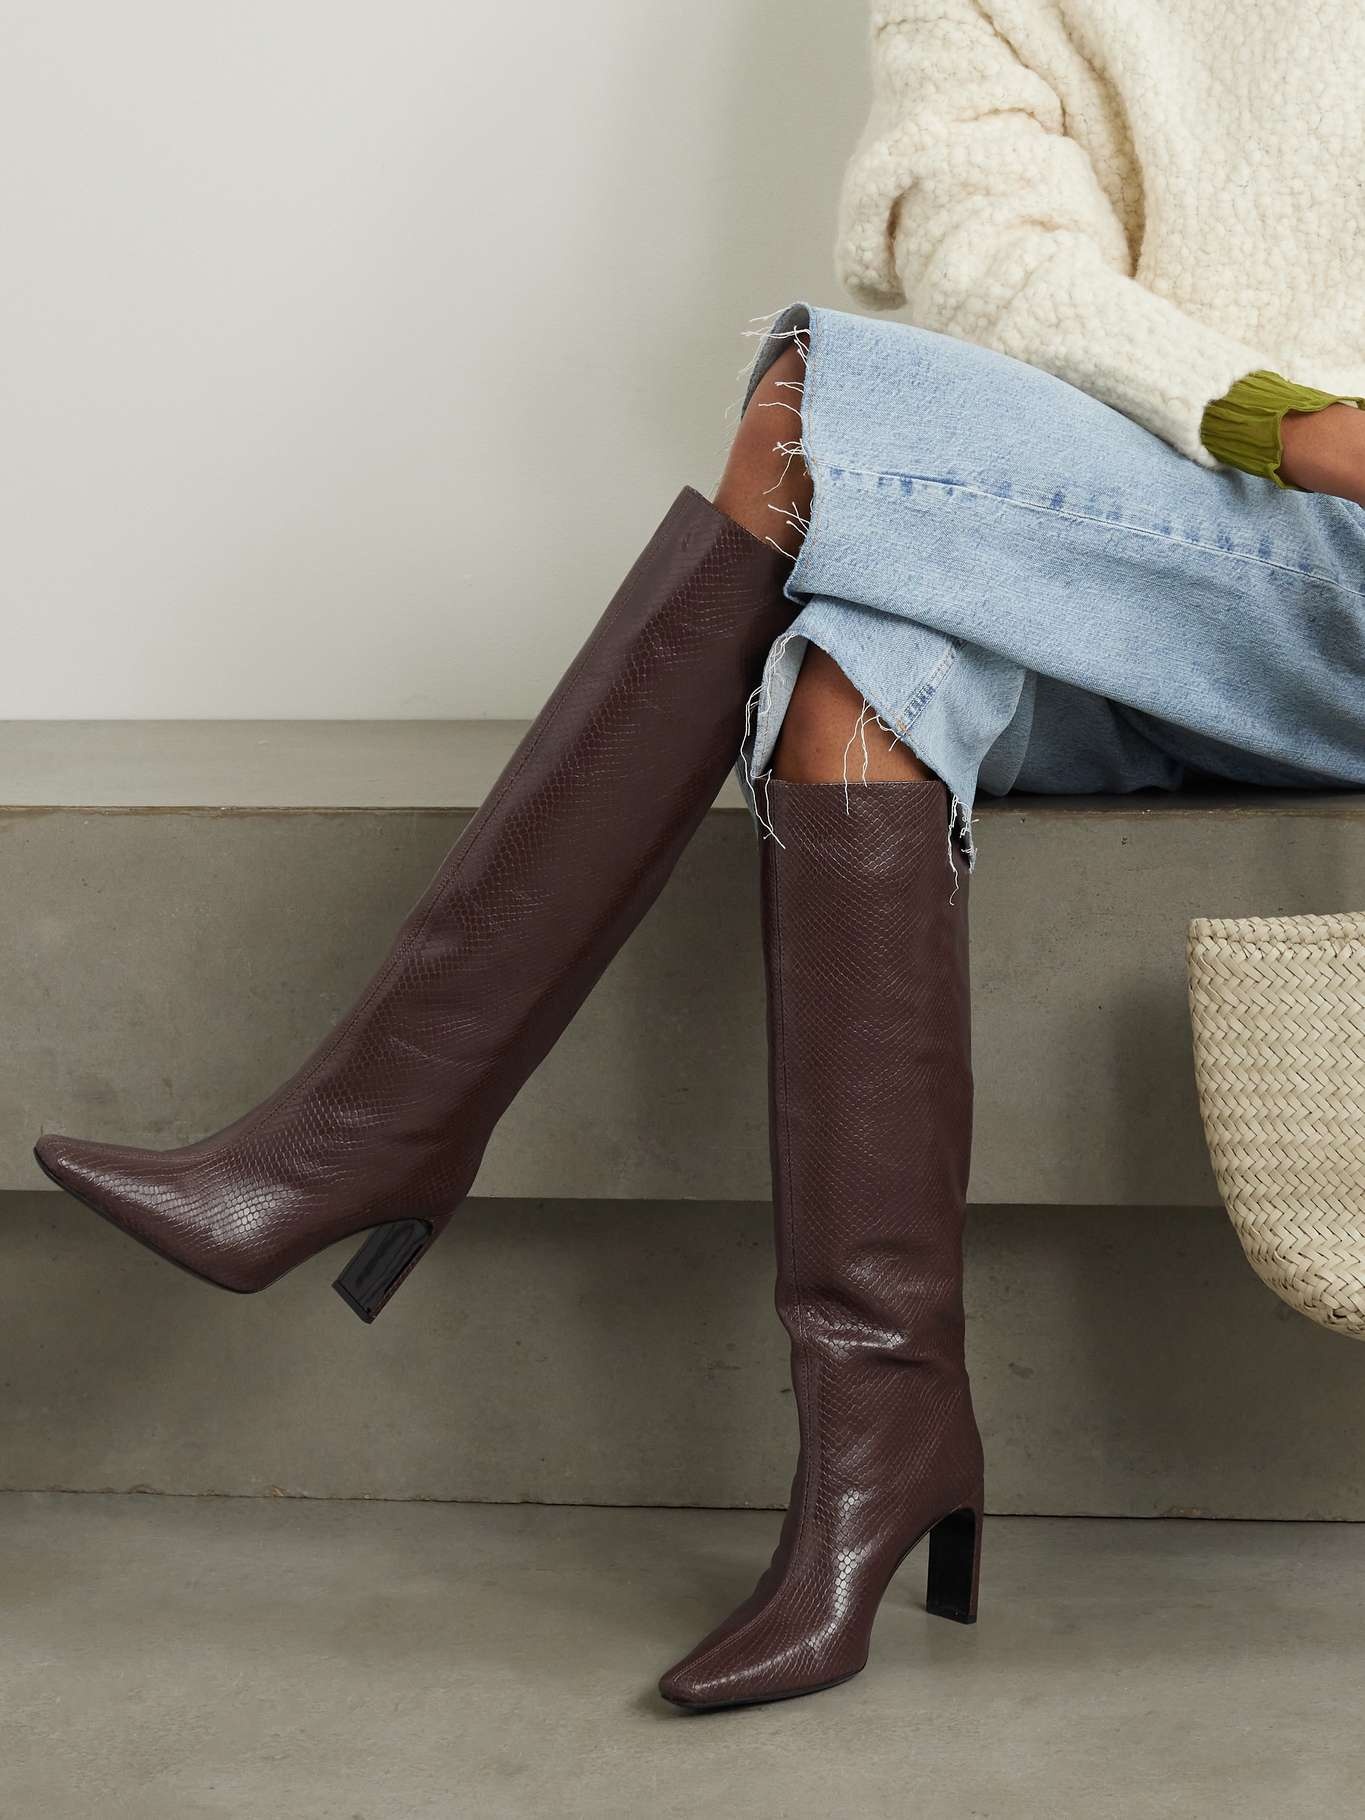 Wally lizard-effect leather knee boots - 2